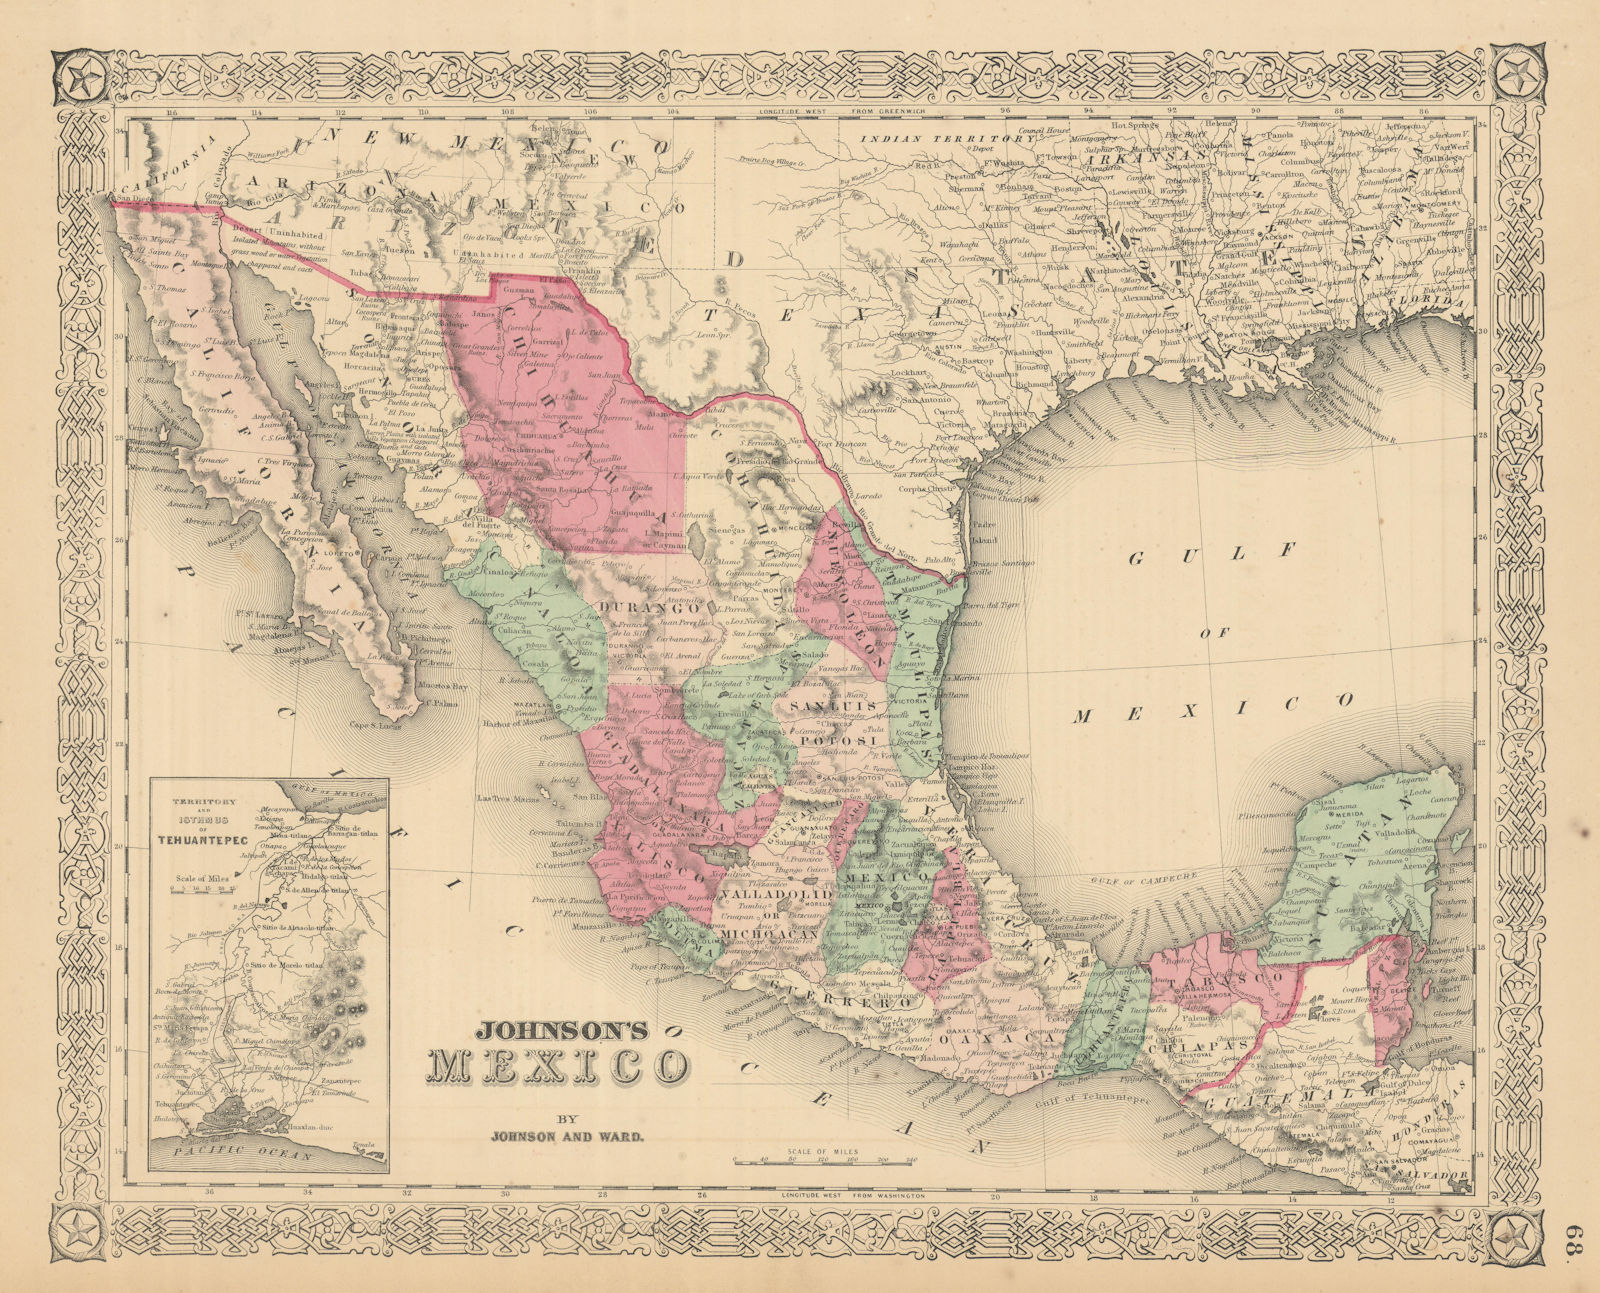 Associate Product Johnson's Mexico showing states. Tehuantepec 1866 old antique map plan chart